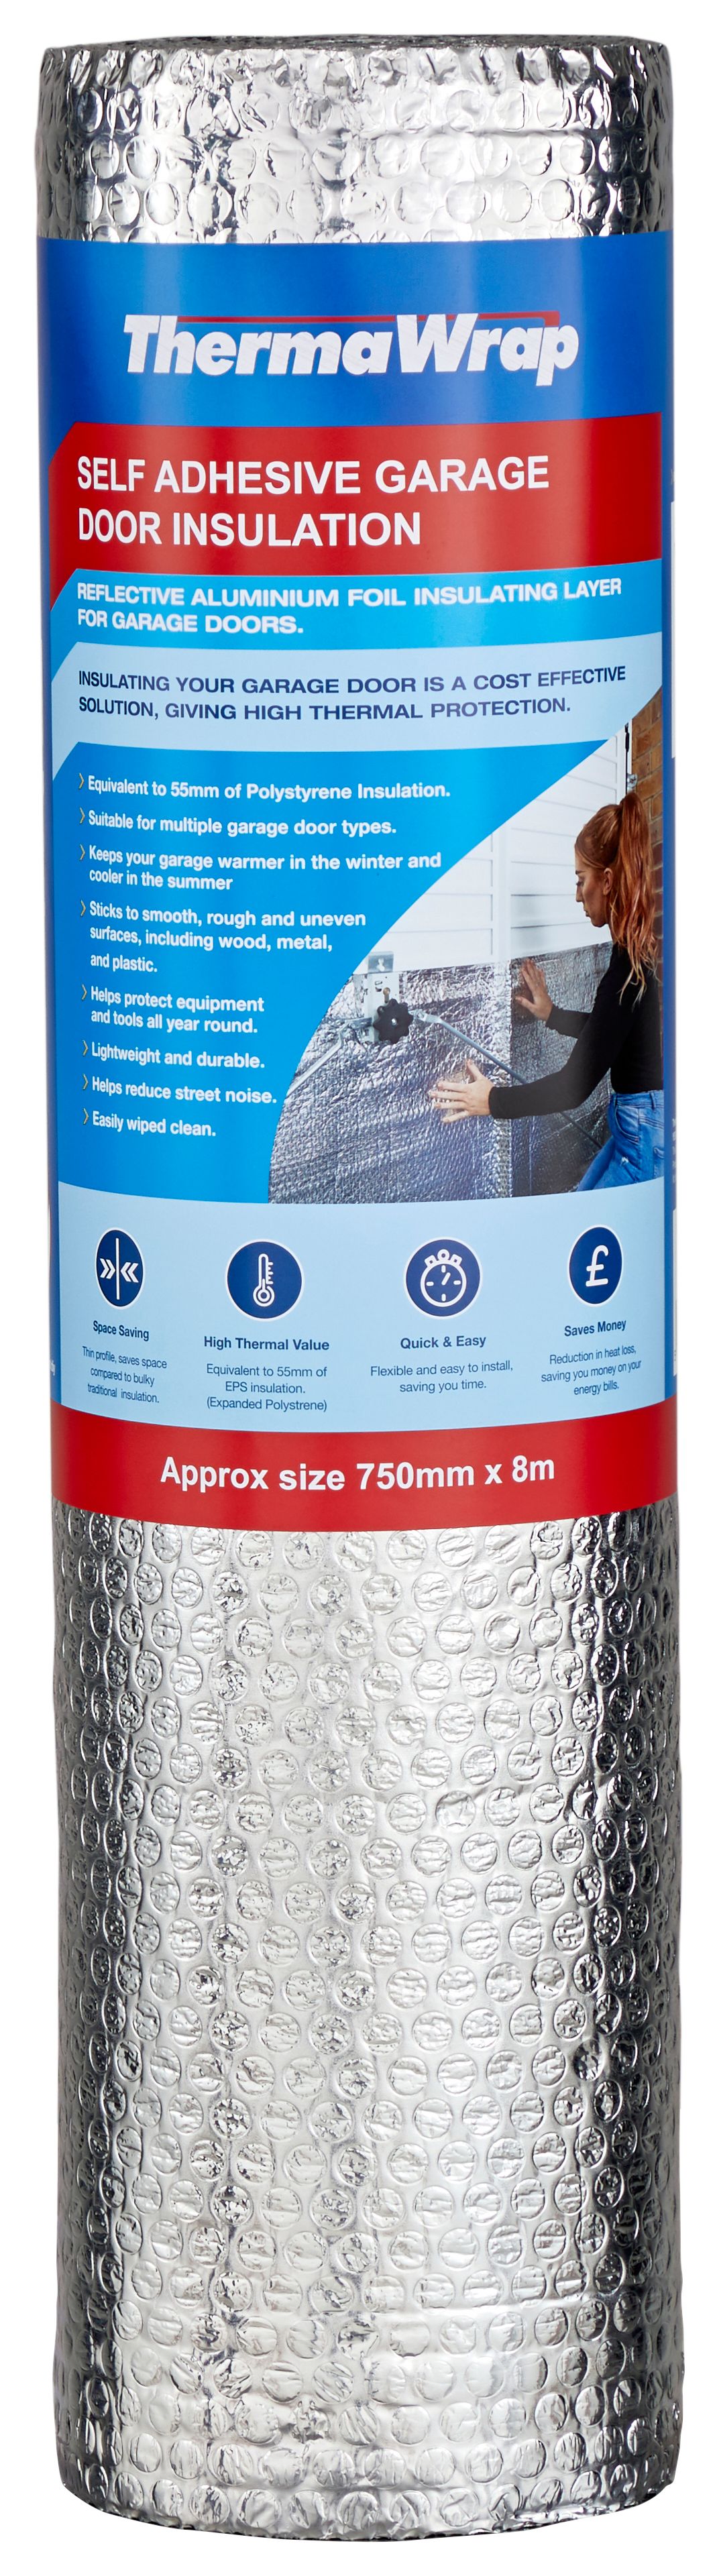 Image of ThermaWrap Self-Adhesive Garage Door Insulation Roll - 750mm x 8m